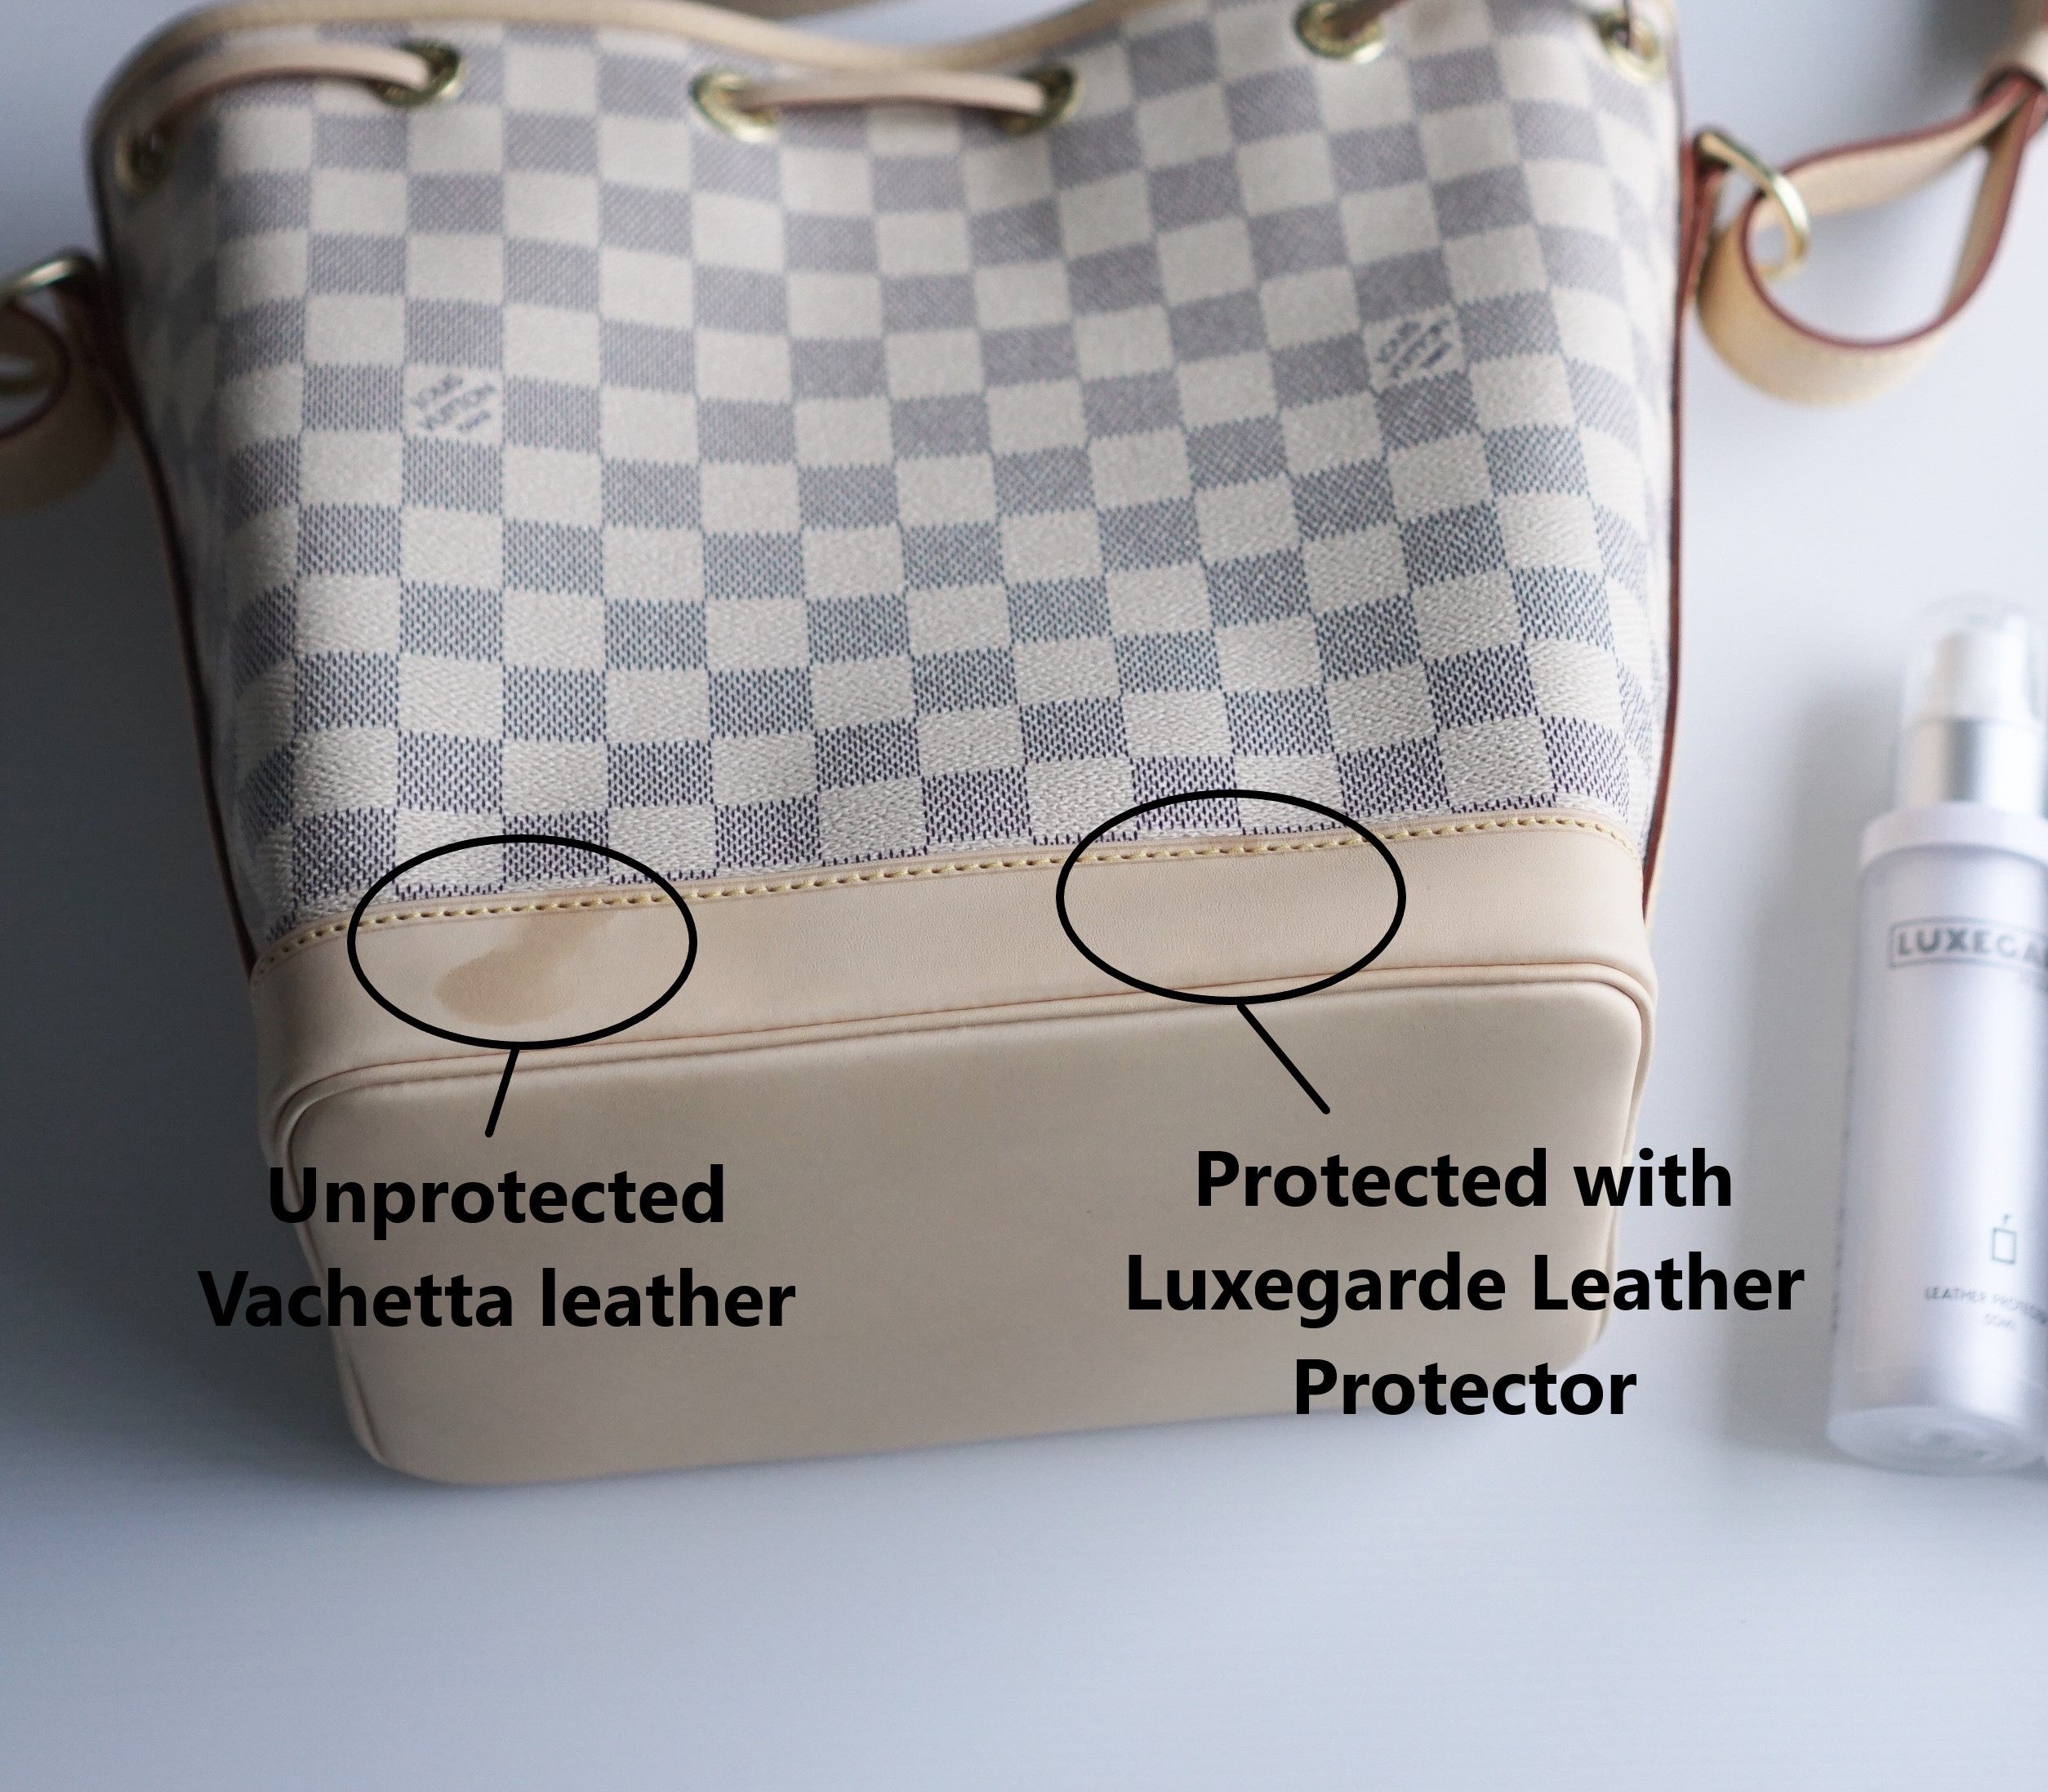 How to Apply Water Repellent for Louis Vuitton Vachetta Leather